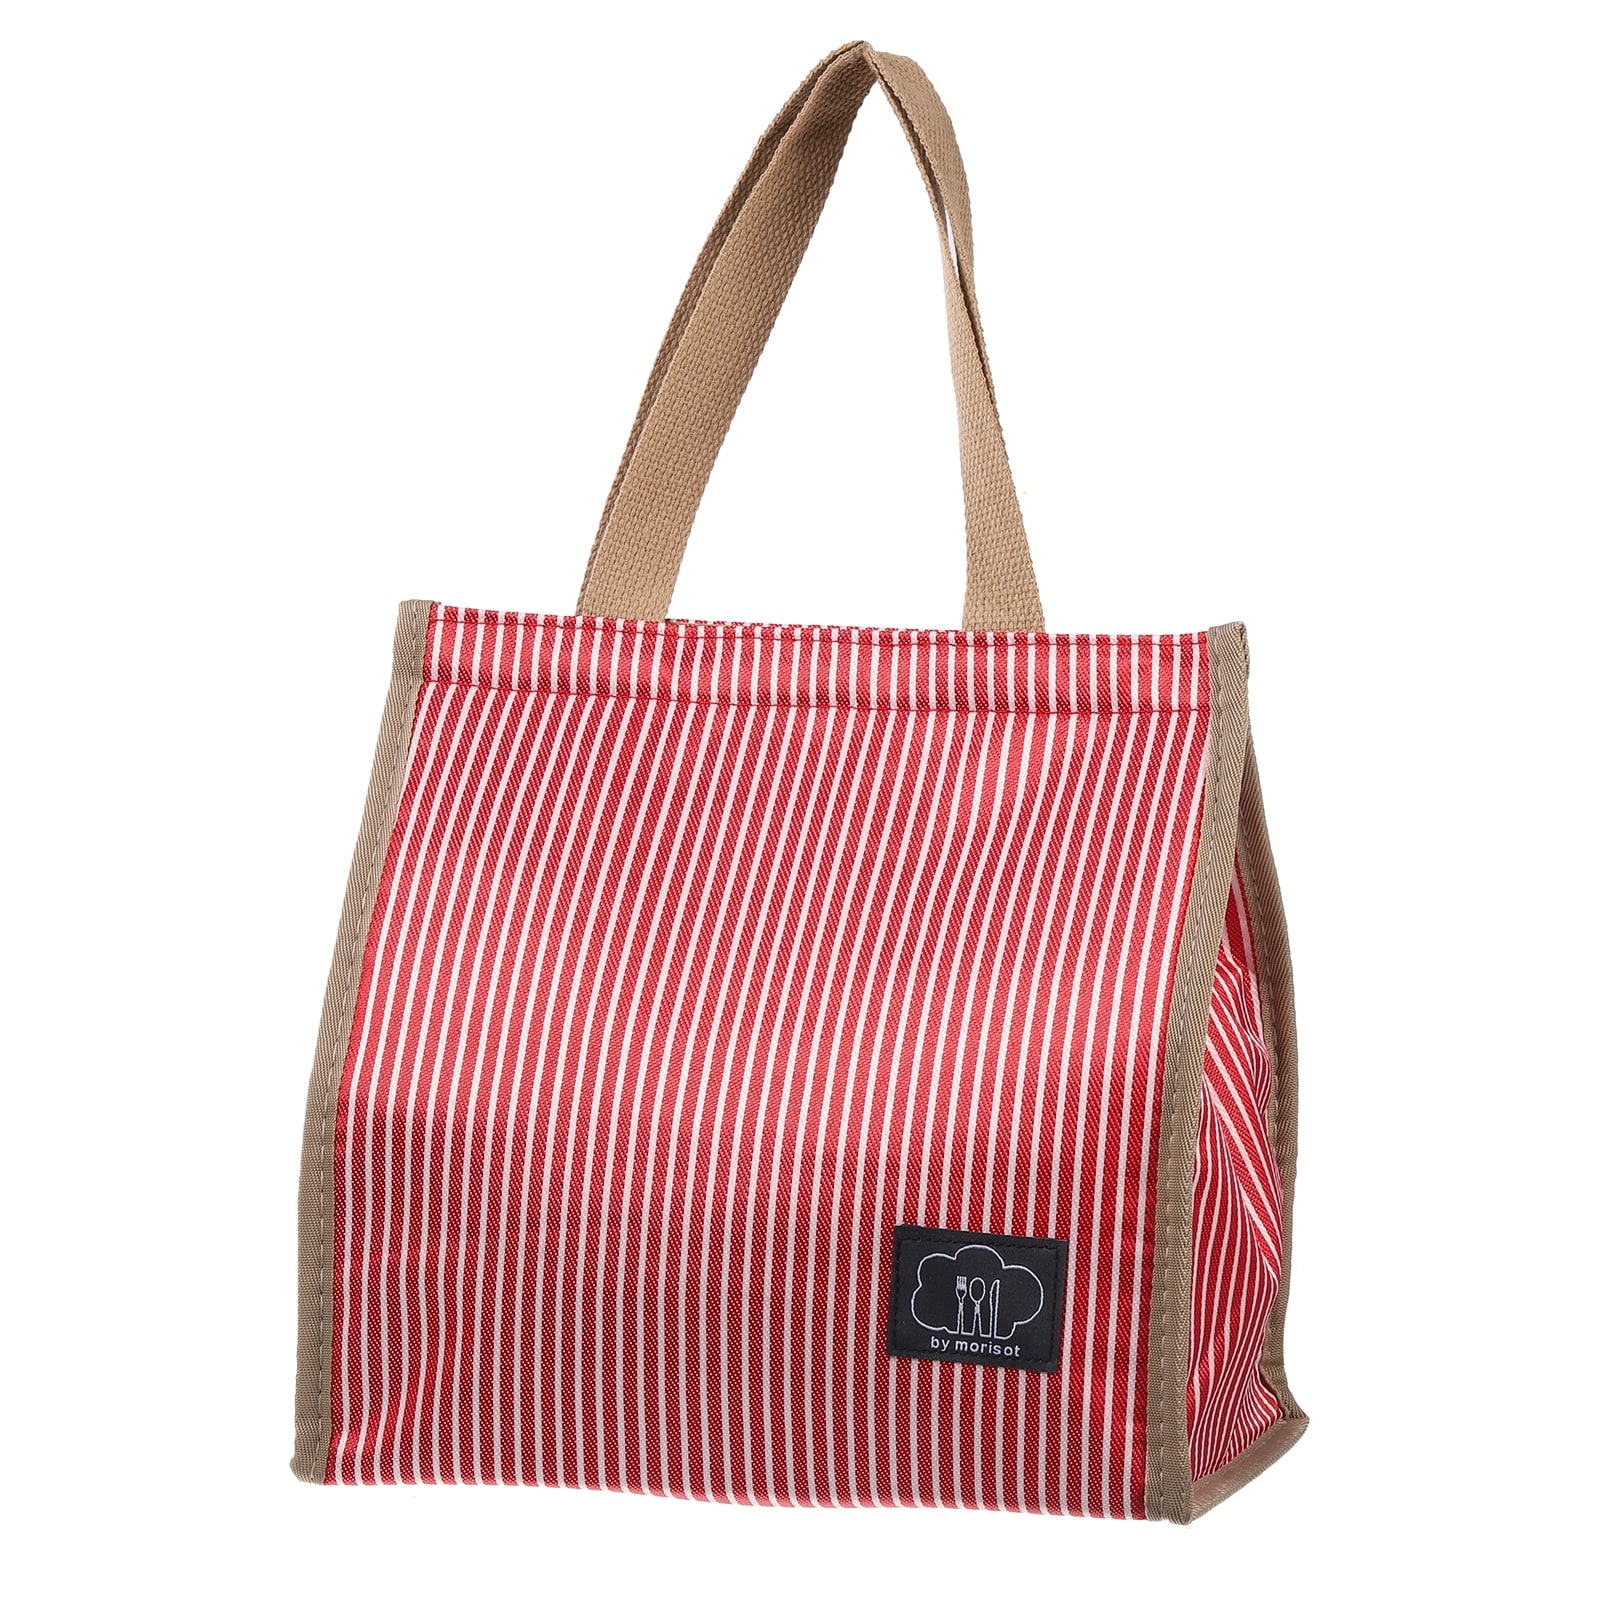 Insulated Lunch Bag, Lunch Tote Bag, 10.24"x6.69"x10.24"